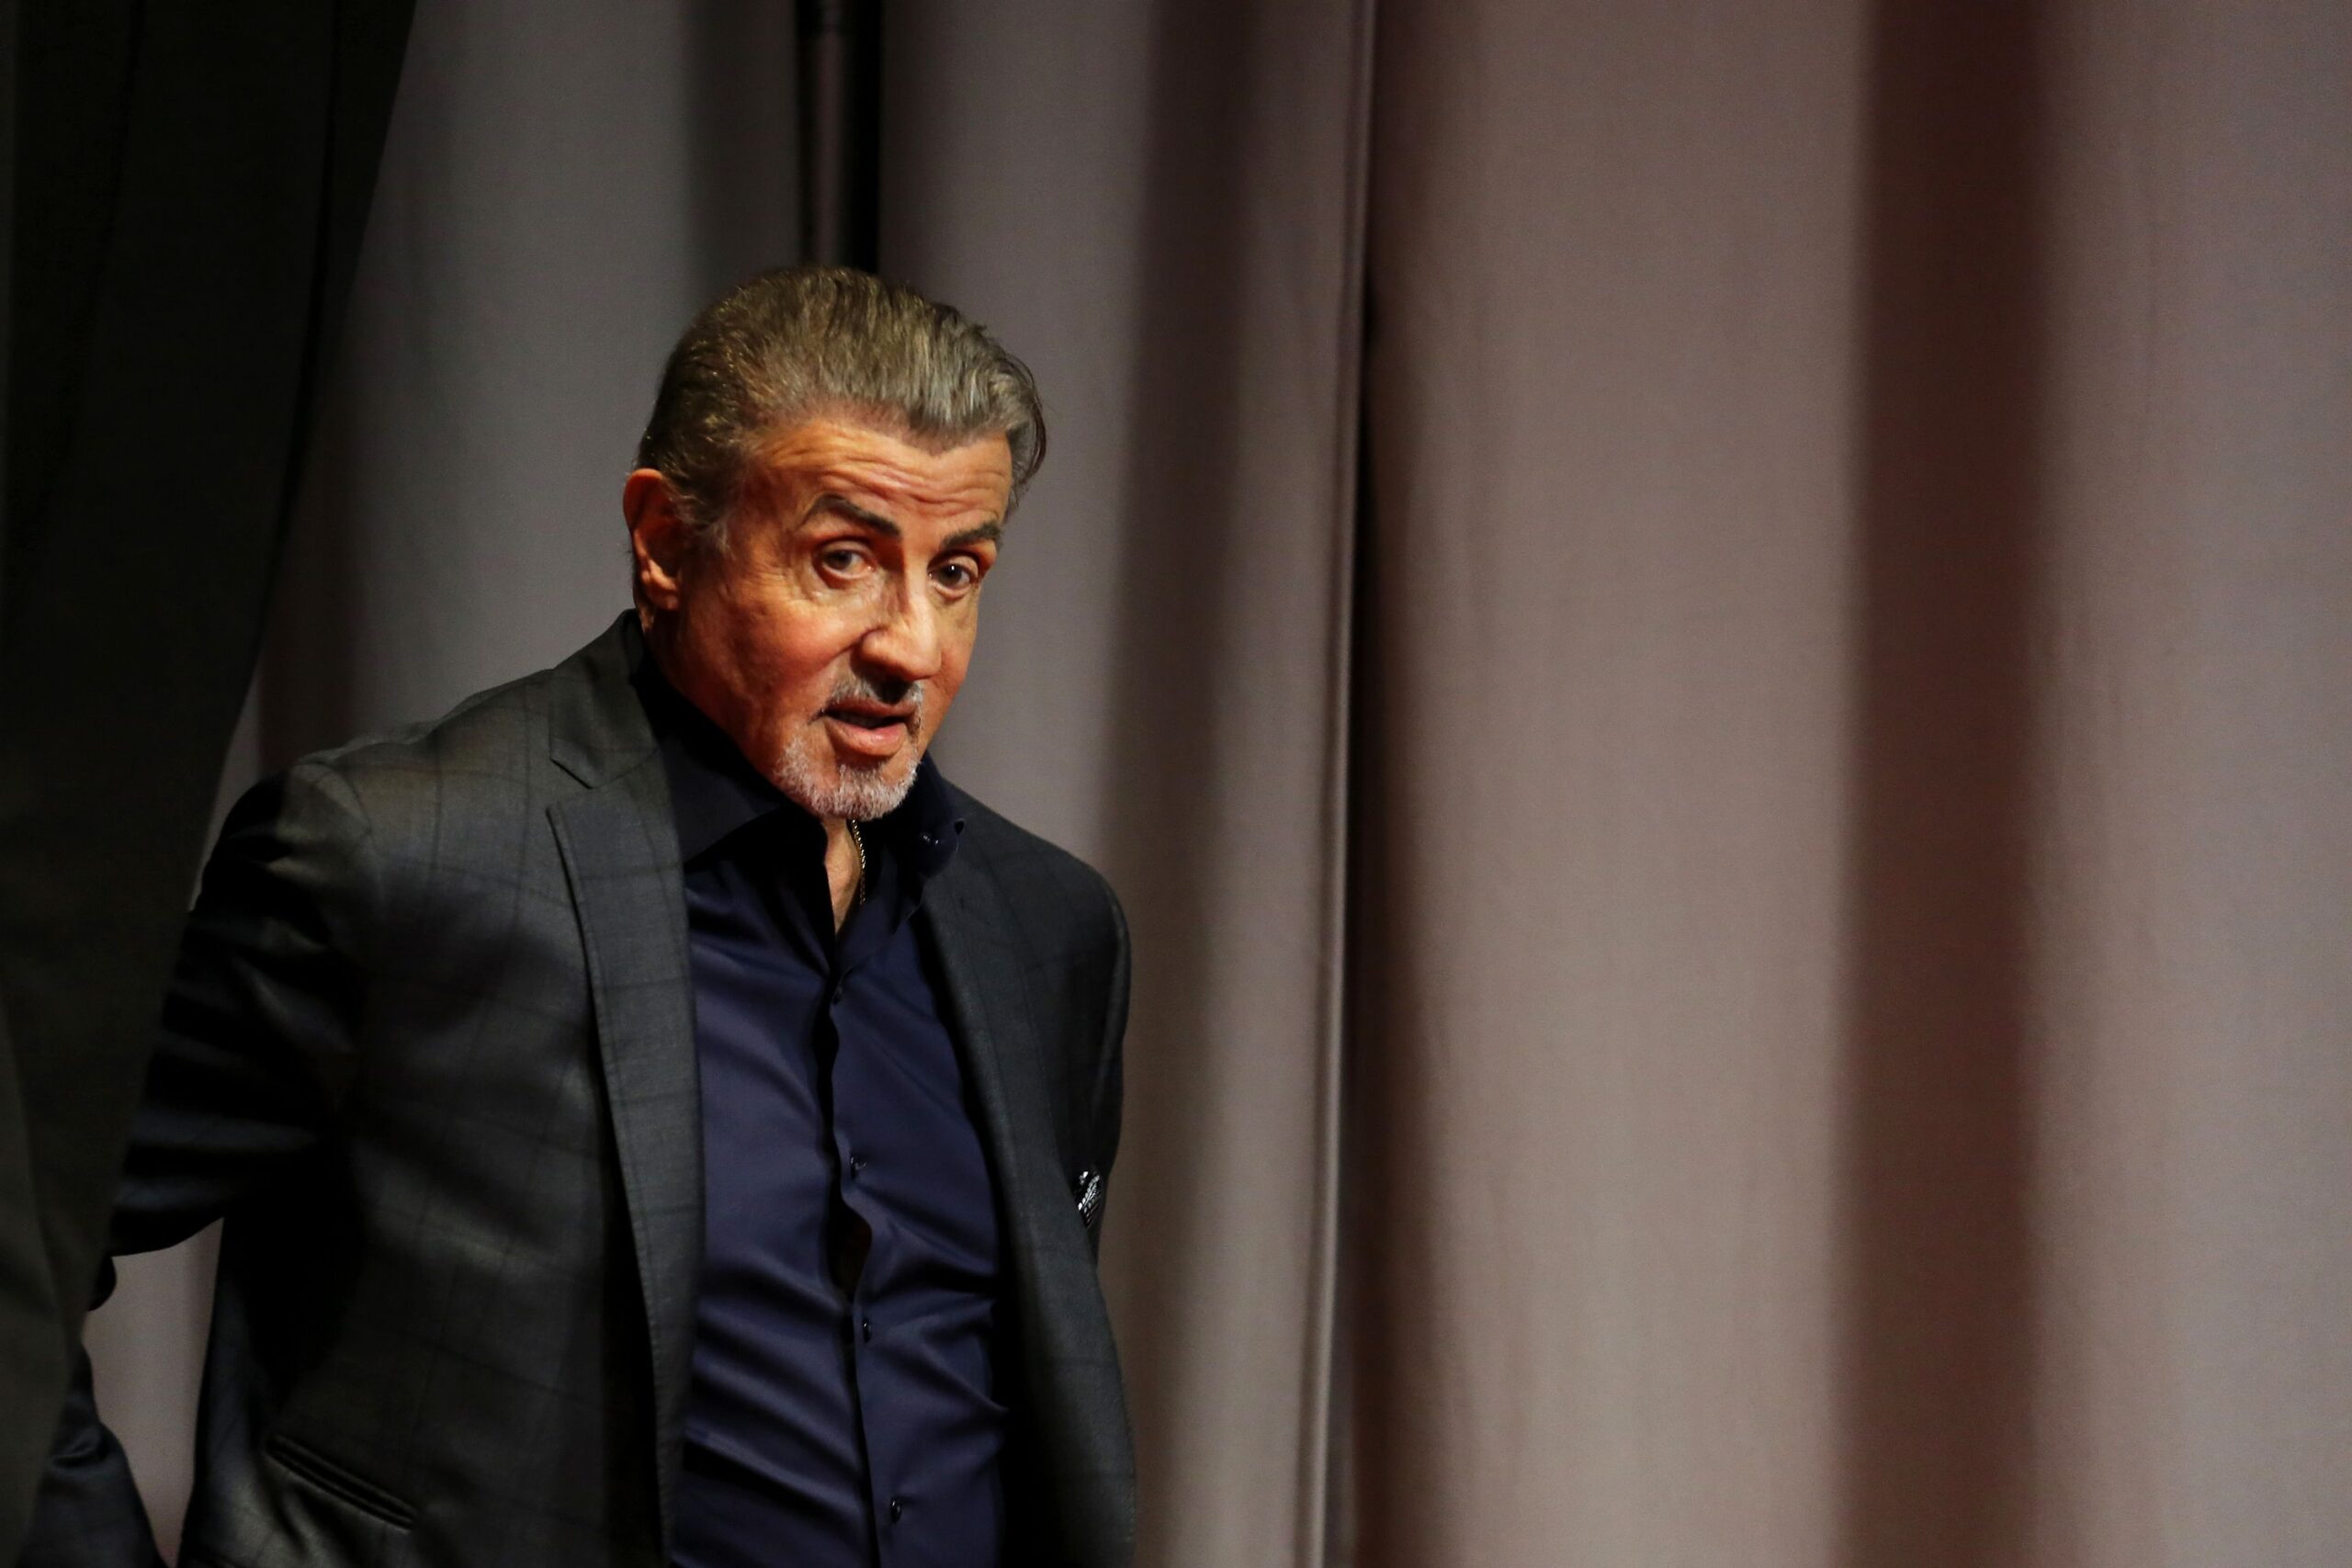 Paramount investigating claims Sylvester Stallone allegedly used disparaging language on ‘Tulsa King’ set - Opinion and Analysis - News